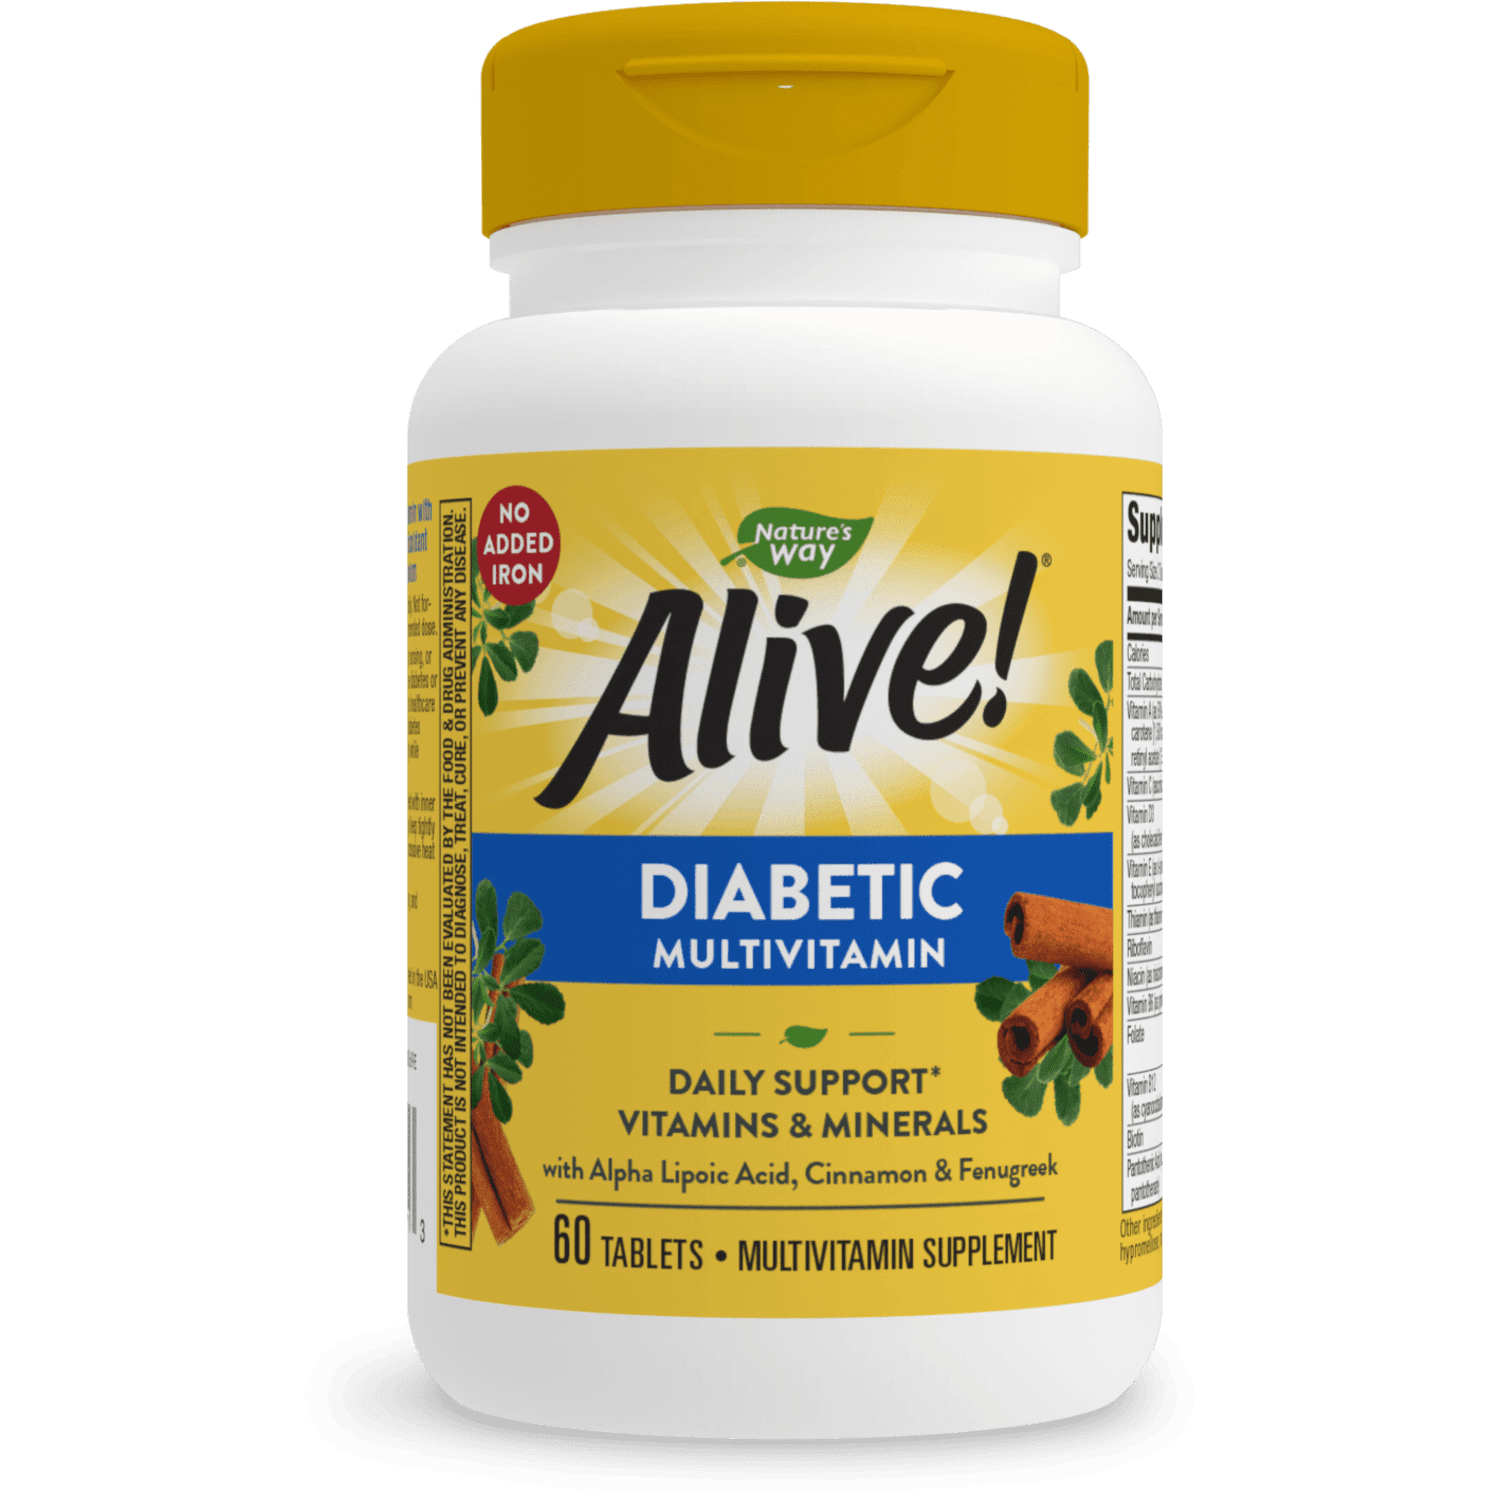 Alive! Diabetic Multivitamin Daily Support* Tablets, 60 Count